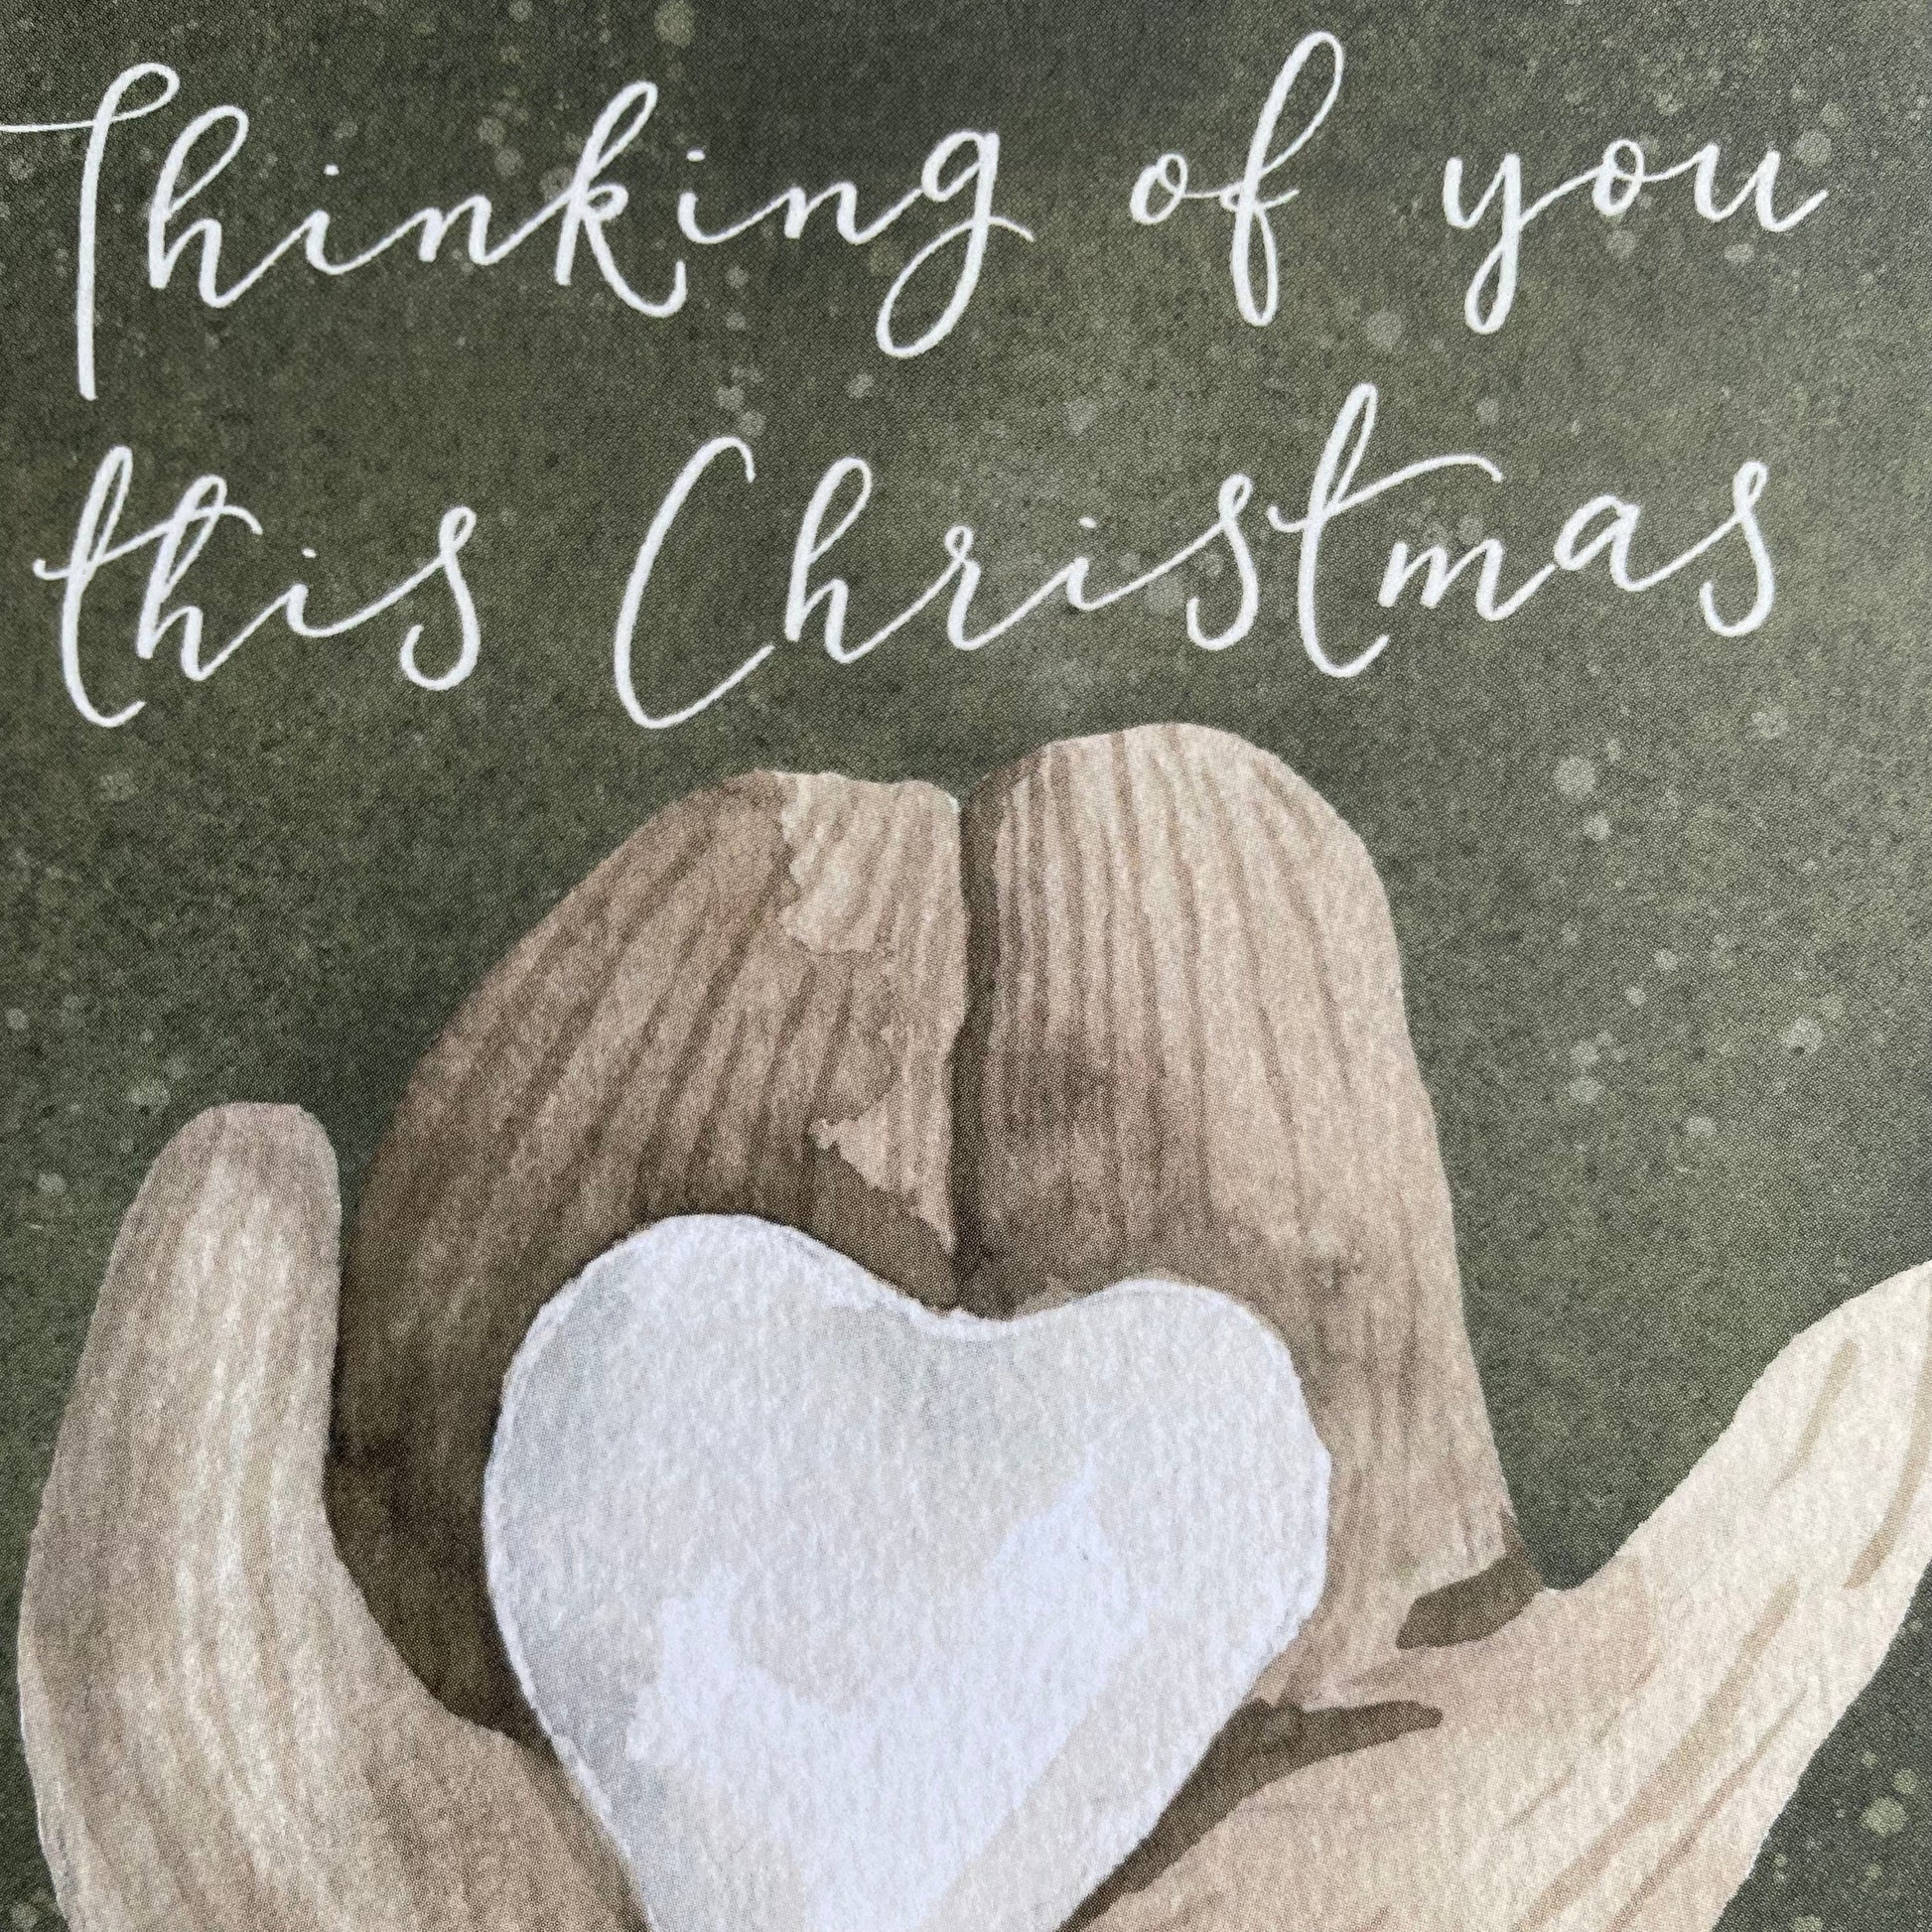 And Hope Designs Cards Thinking of you this Christmas card